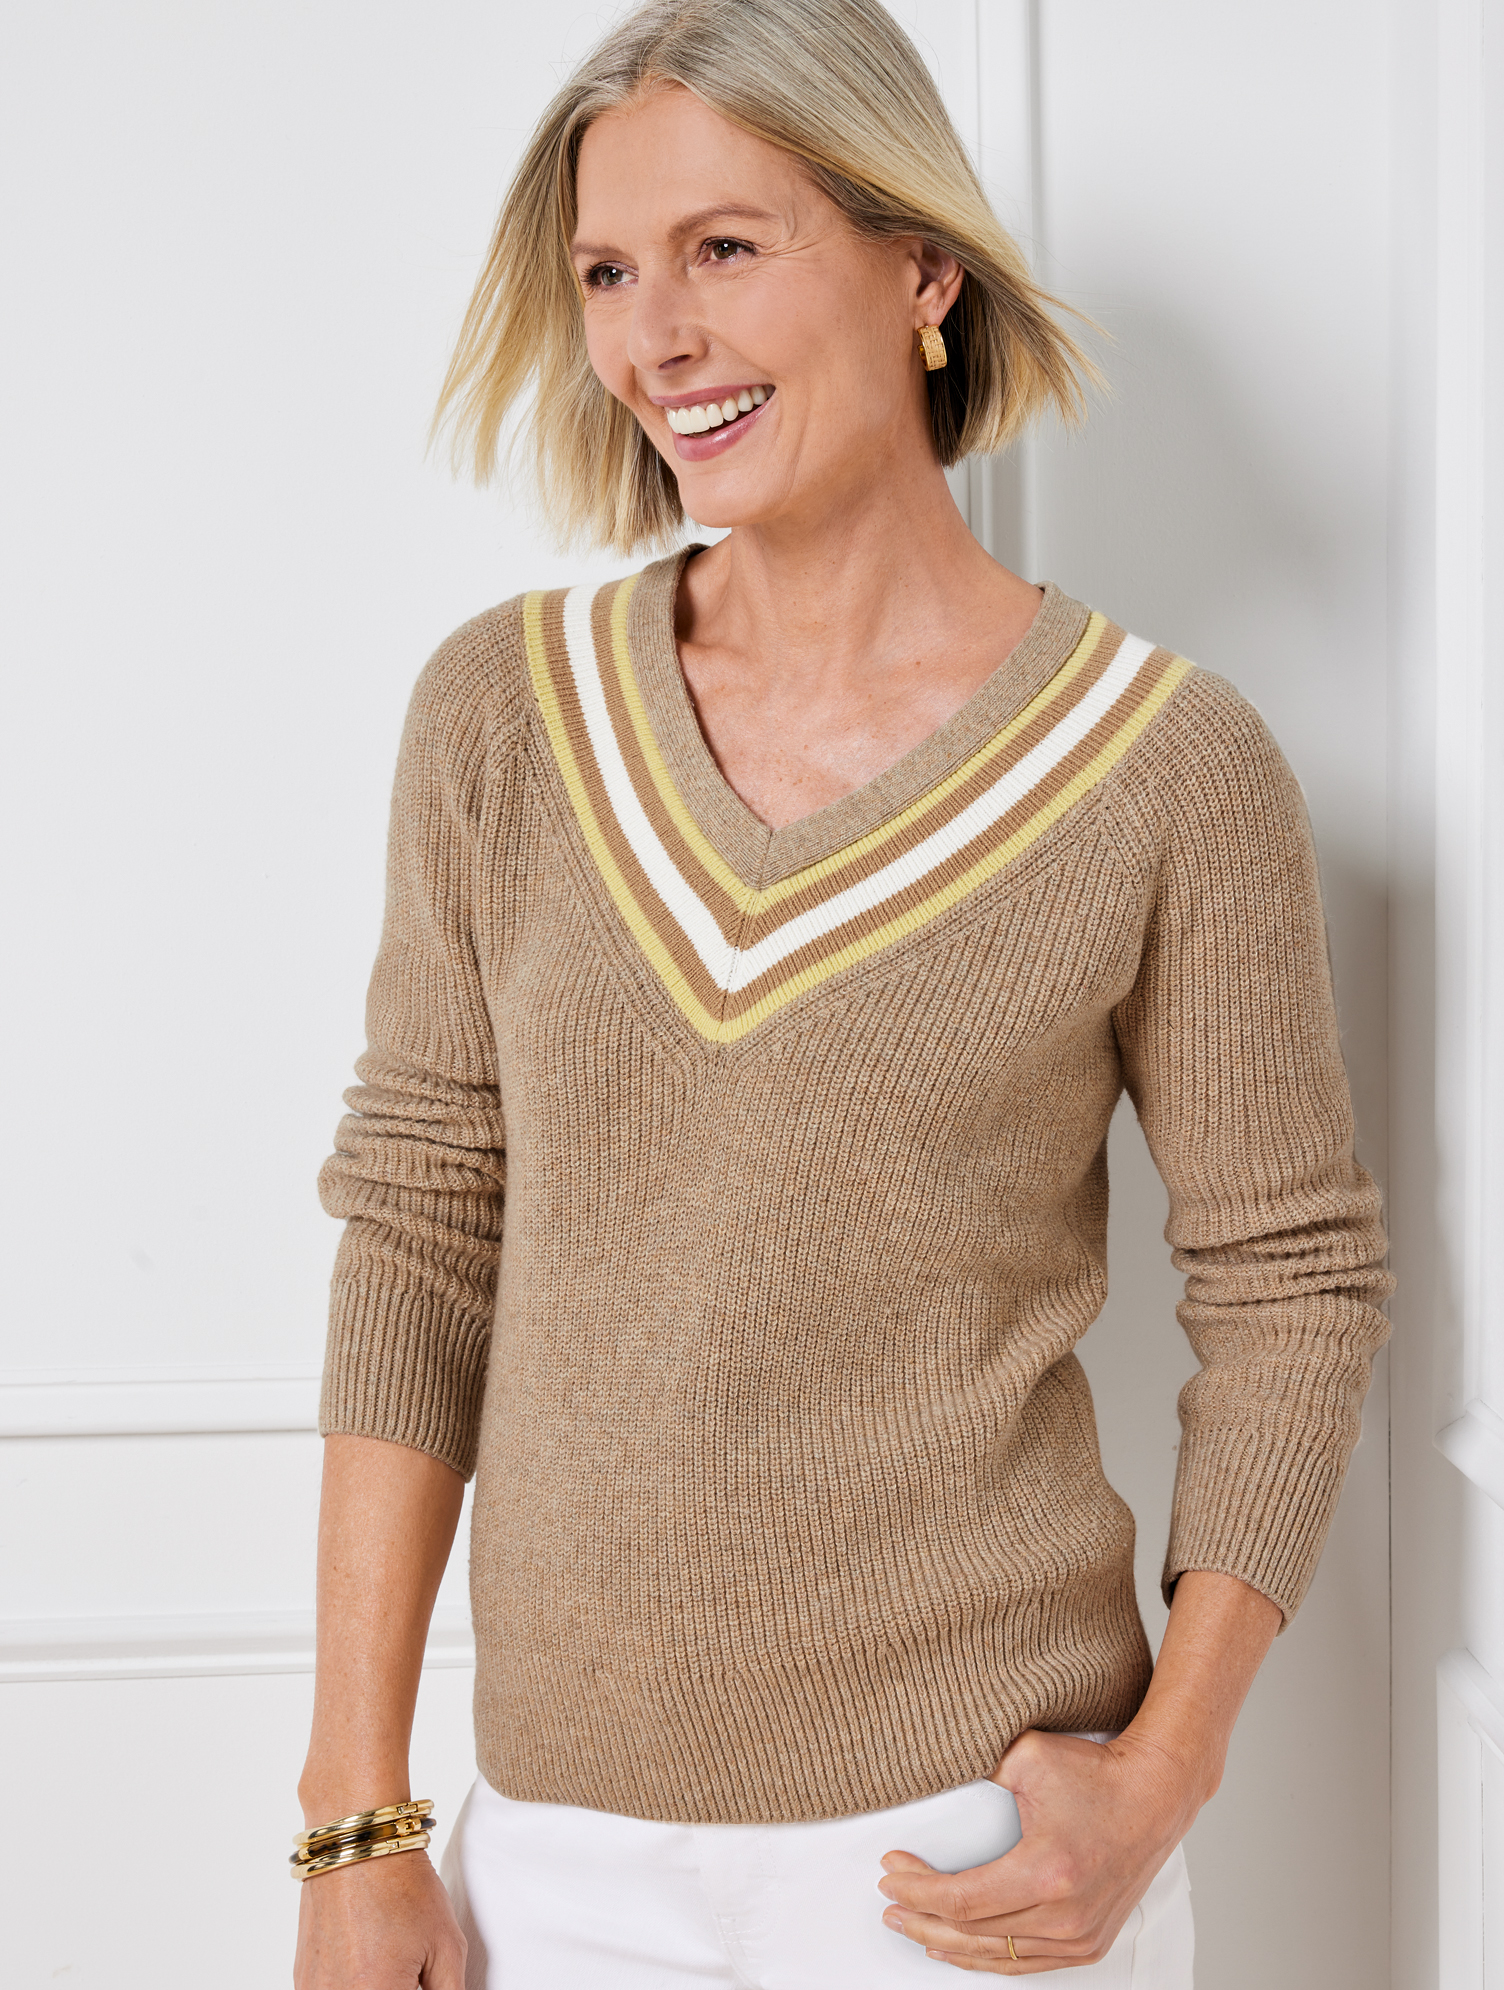 Plus Size - Brushed Cotton Johnny Collar Pullover Sweater - Simple Stripe - Oatmeal Heather/Terracotta - 1x Talbots